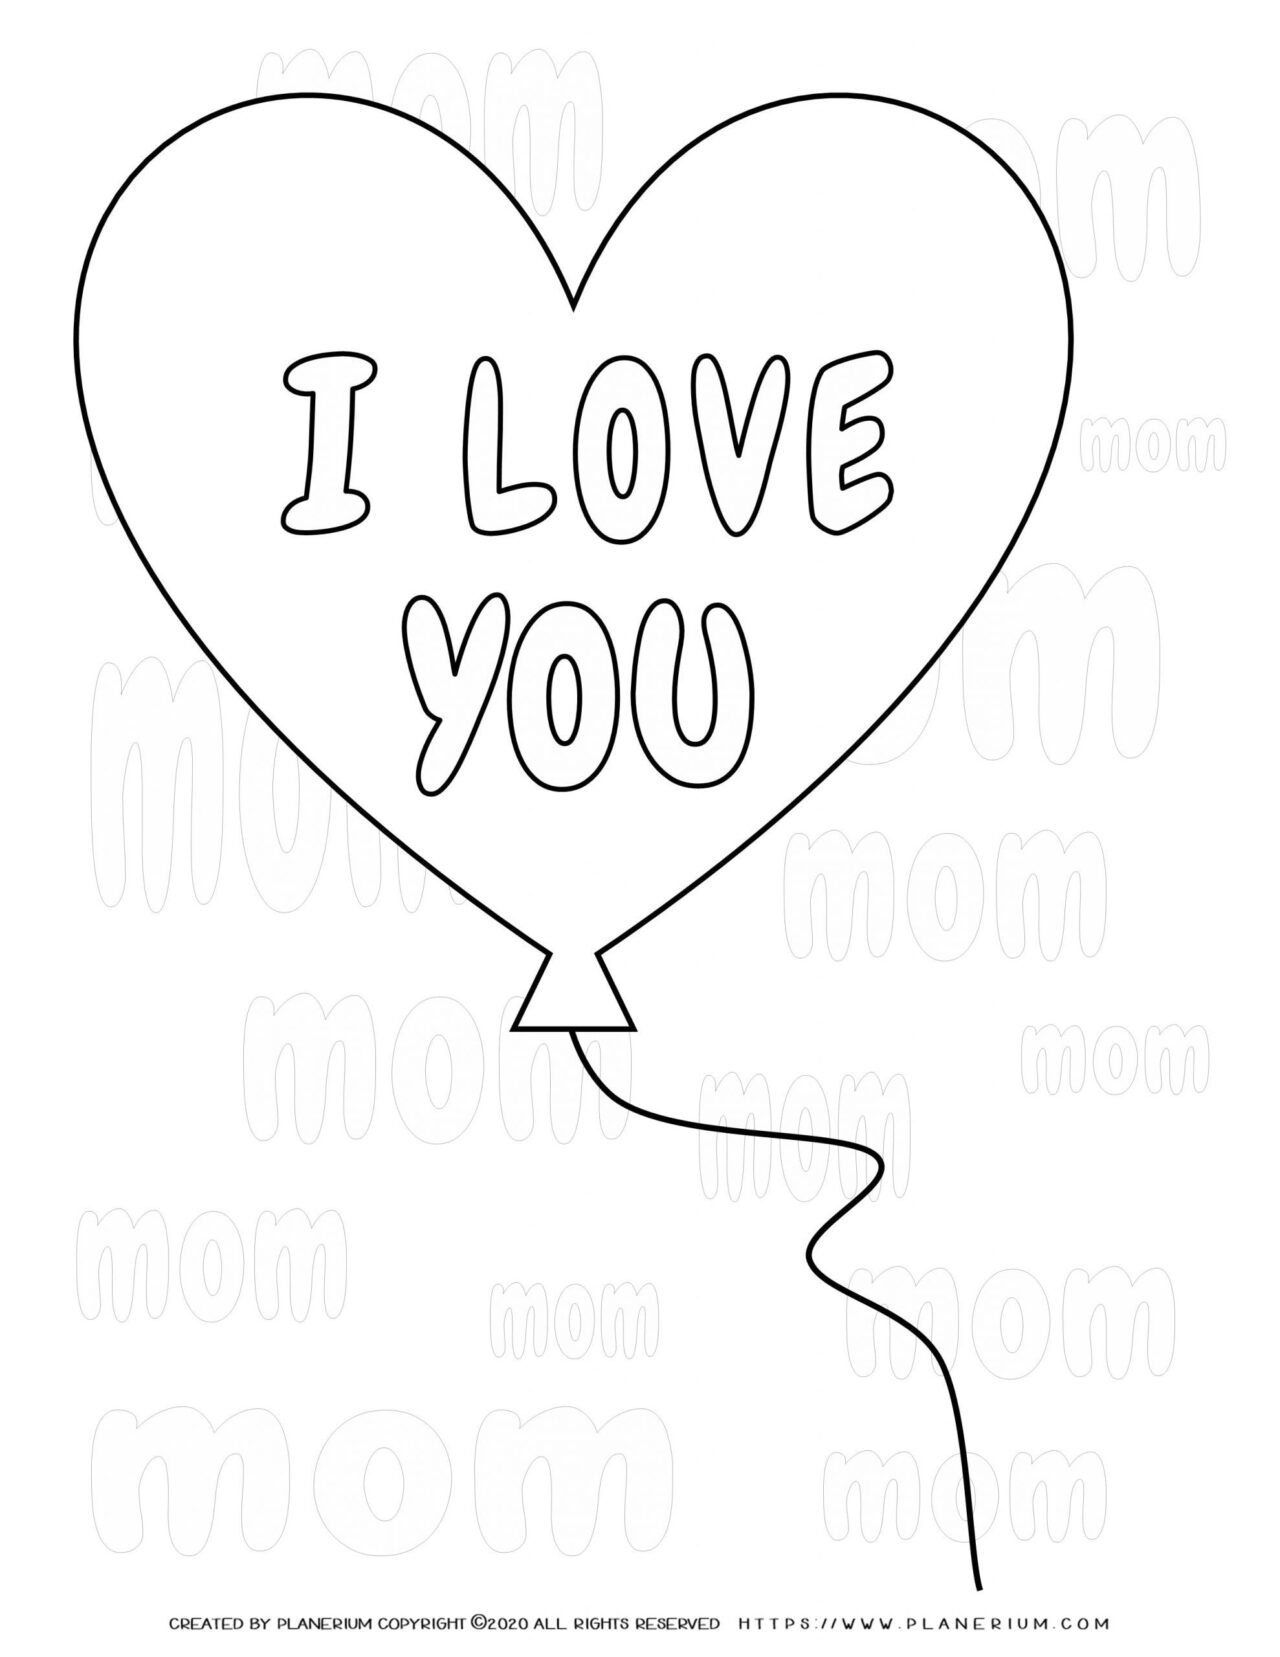 Mother's Day Coloring Page - Heart Balloon "I Love You, Mom"